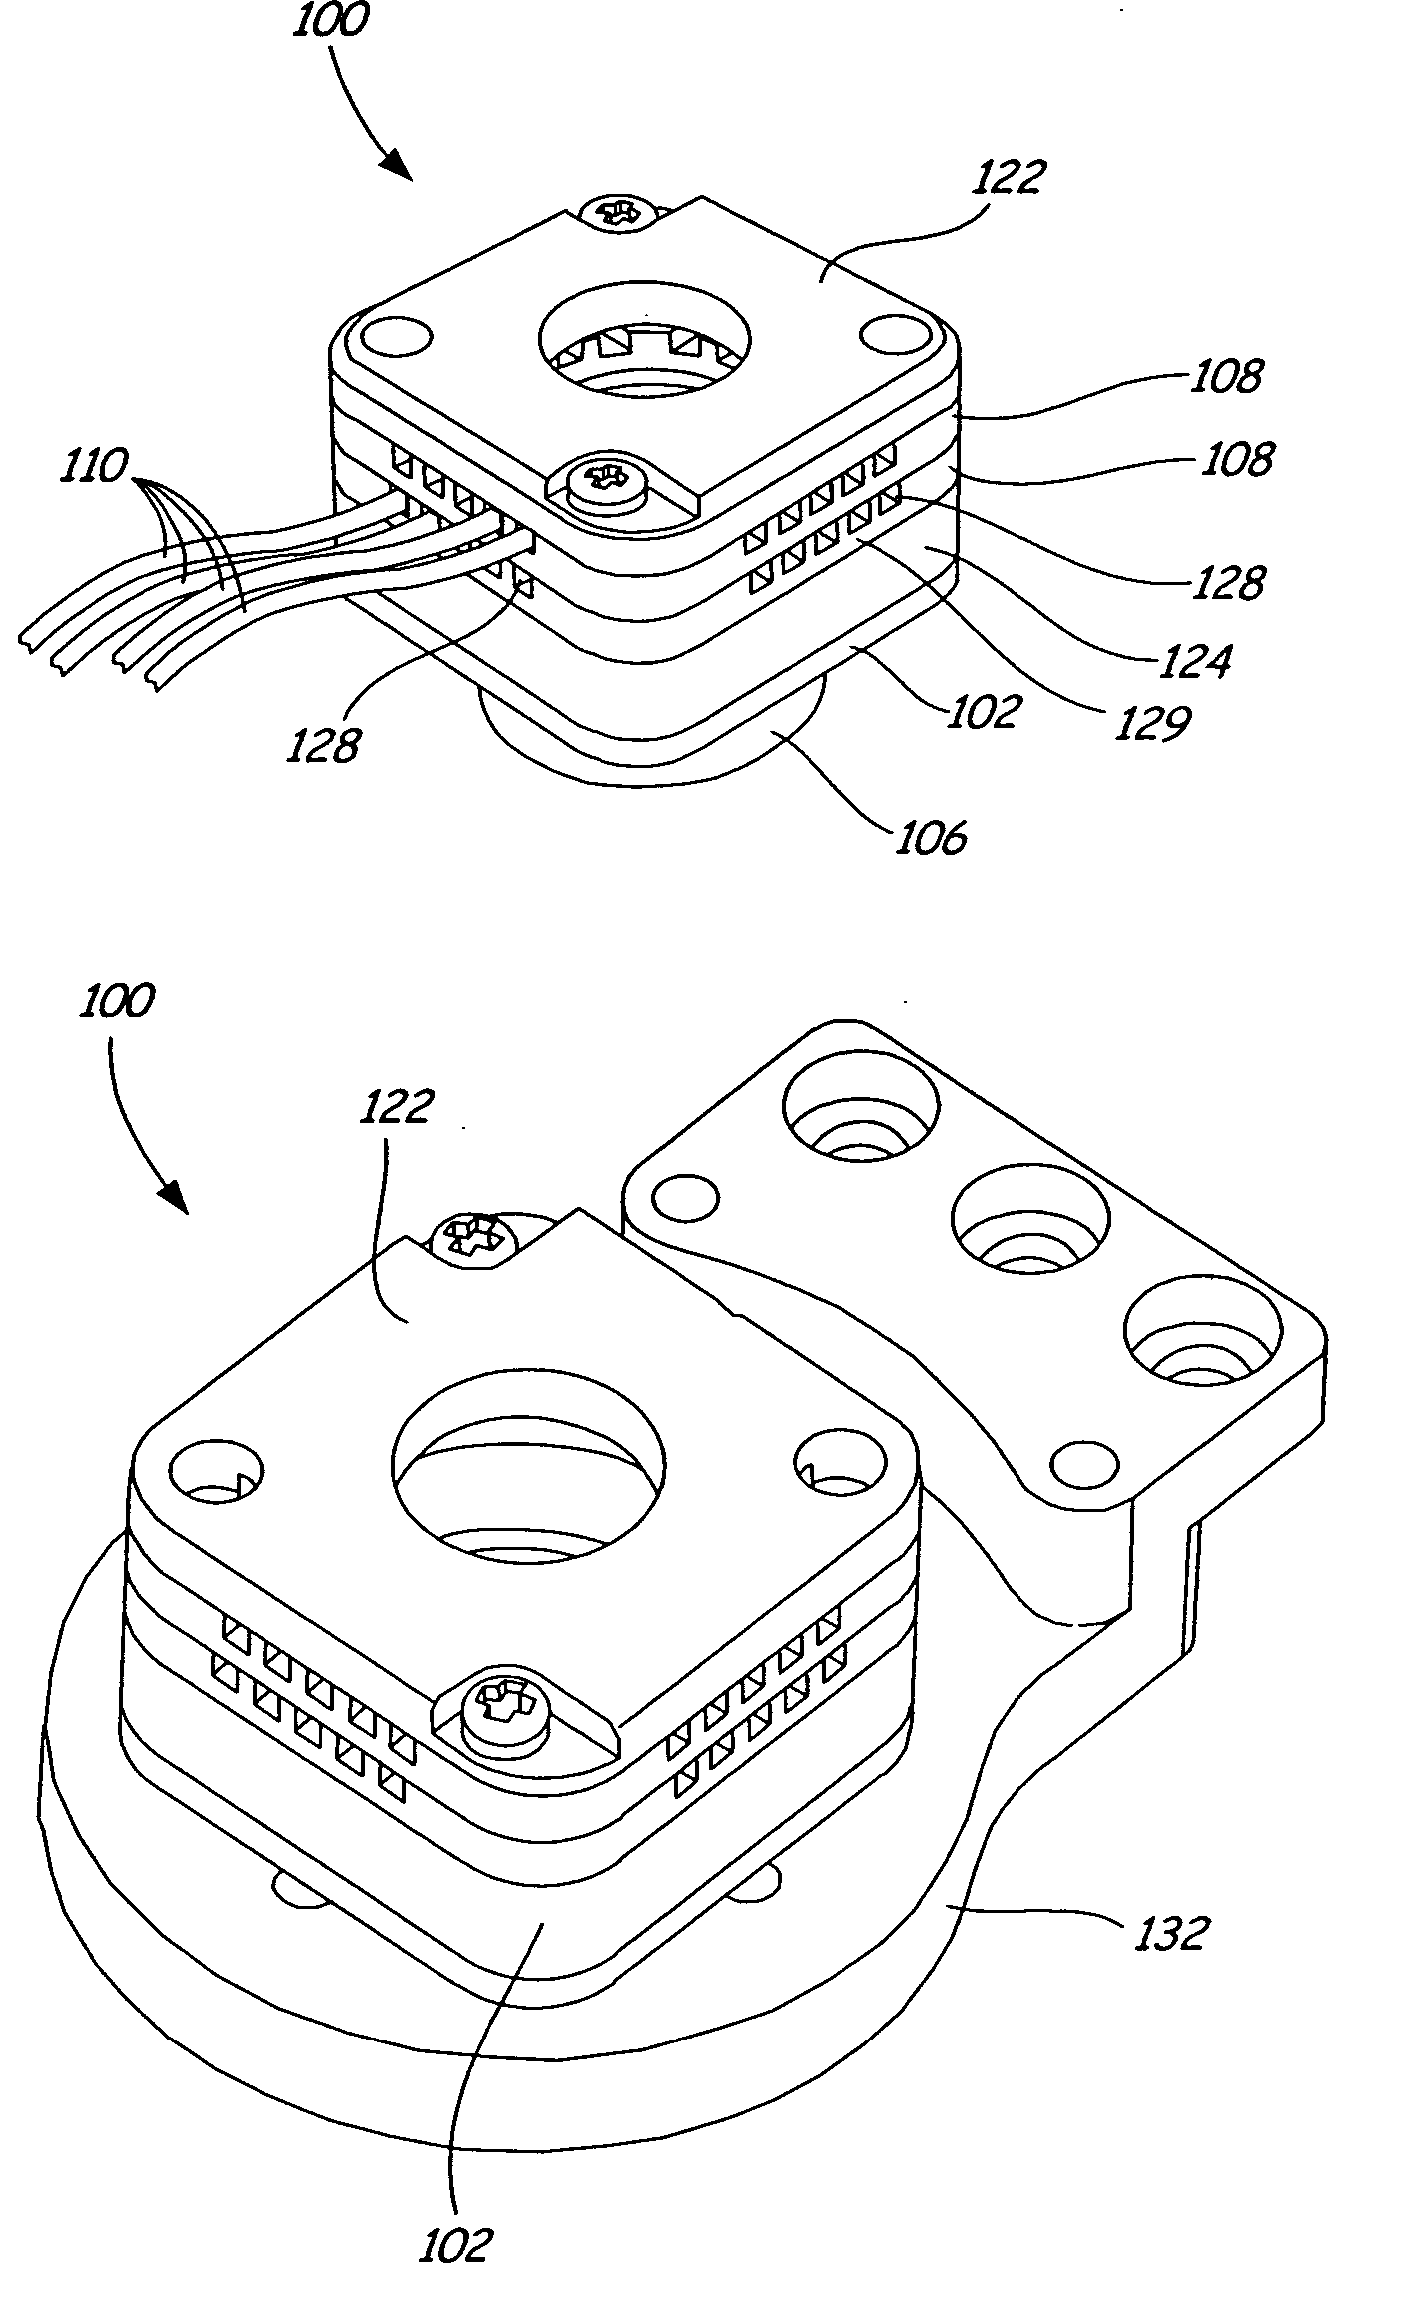 Replaceable probe apparatus for probing semiconductor wafer